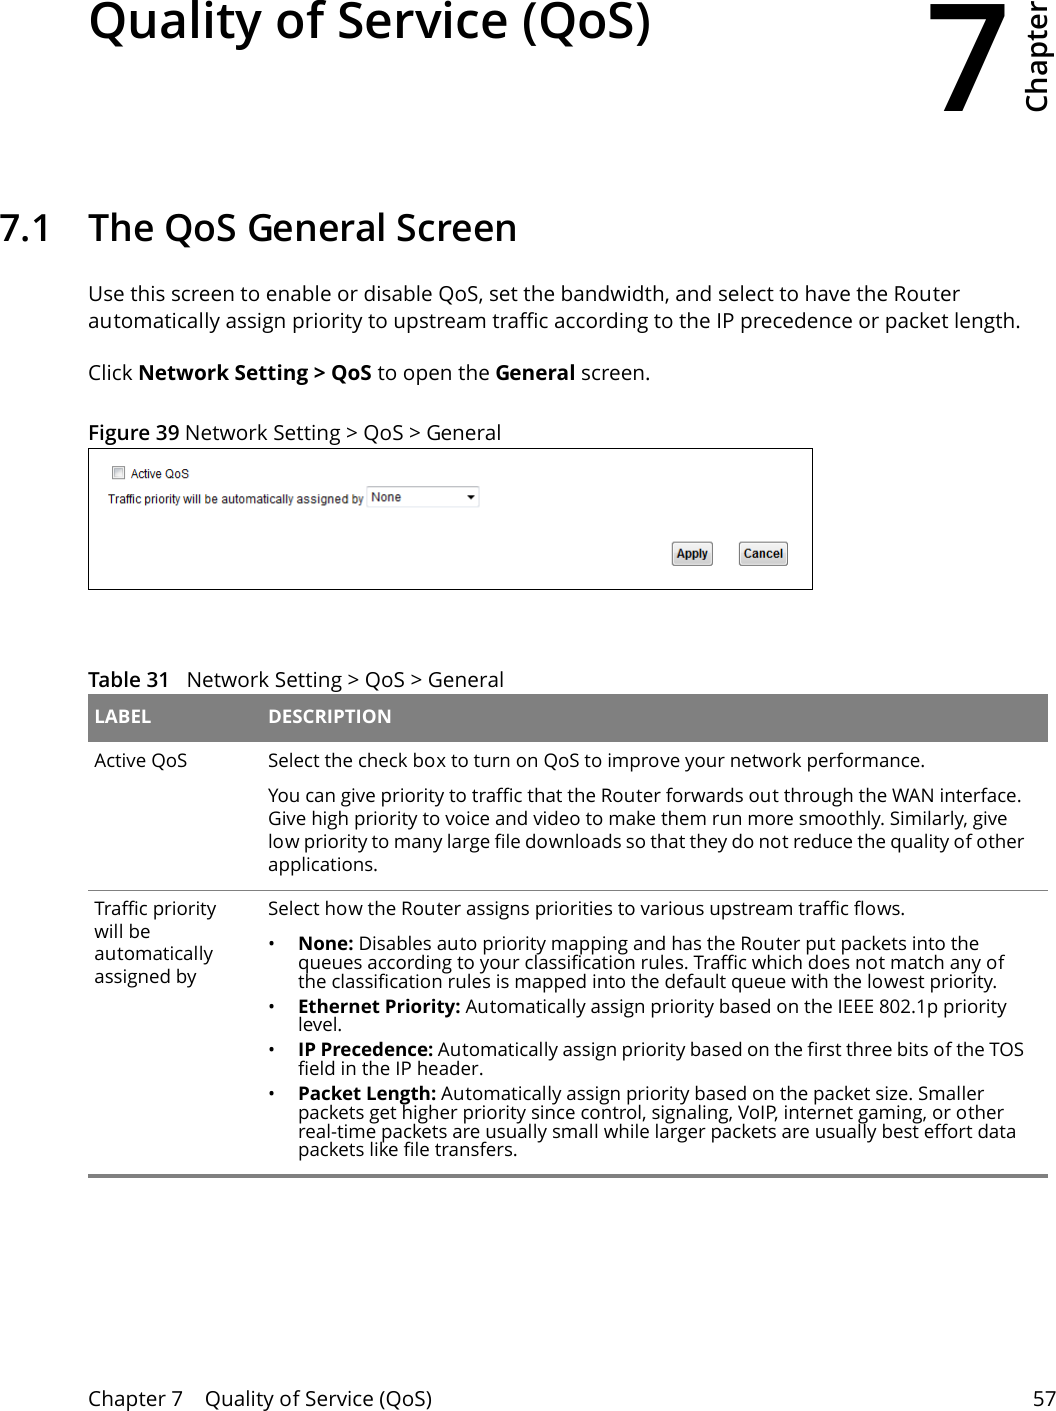 7Chapter Chapter 7    Quality of Service (QoS) 57CHAPTER 7 Chapter 7 Quality of Service (QoS)7.1   The QoS General Screen Use this screen to enable or disable QoS, set the bandwidth, and select to have the Router automatically assign priority to upstream traffic according to the IP precedence or packet length.Click Network Setting &gt; QoS to open the General screen.  Figure 39 Network Setting &gt; QoS &gt; General Table 31   Network Setting &gt; QoS &gt; General LABEL DESCRIPTIONActive QoS Select the check box to turn on QoS to improve your network performance. You can give priority to traffic that the Router forwards out through the WAN interface. Give high priority to voice and video to make them run more smoothly. Similarly, give low priority to many large file downloads so that they do not reduce the quality of other applications. Traffic priority will be automatically assigned bySelect how the Router assigns priorities to various upstream traffic flows.•None: Disables auto priority mapping and has the Router put packets into the queues according to your classification rules. Traffic which does not match any of the classification rules is mapped into the default queue with the lowest priority.•Ethernet Priority: Automatically assign priority based on the IEEE 802.1p priority level.•IP Precedence: Automatically assign priority based on the first three bits of the TOS field in the IP header.•Packet Length: Automatically assign priority based on the packet size. Smaller packets get higher priority since control, signaling, VoIP, internet gaming, or other real-time packets are usually small while larger packets are usually best effort data packets like file transfers.